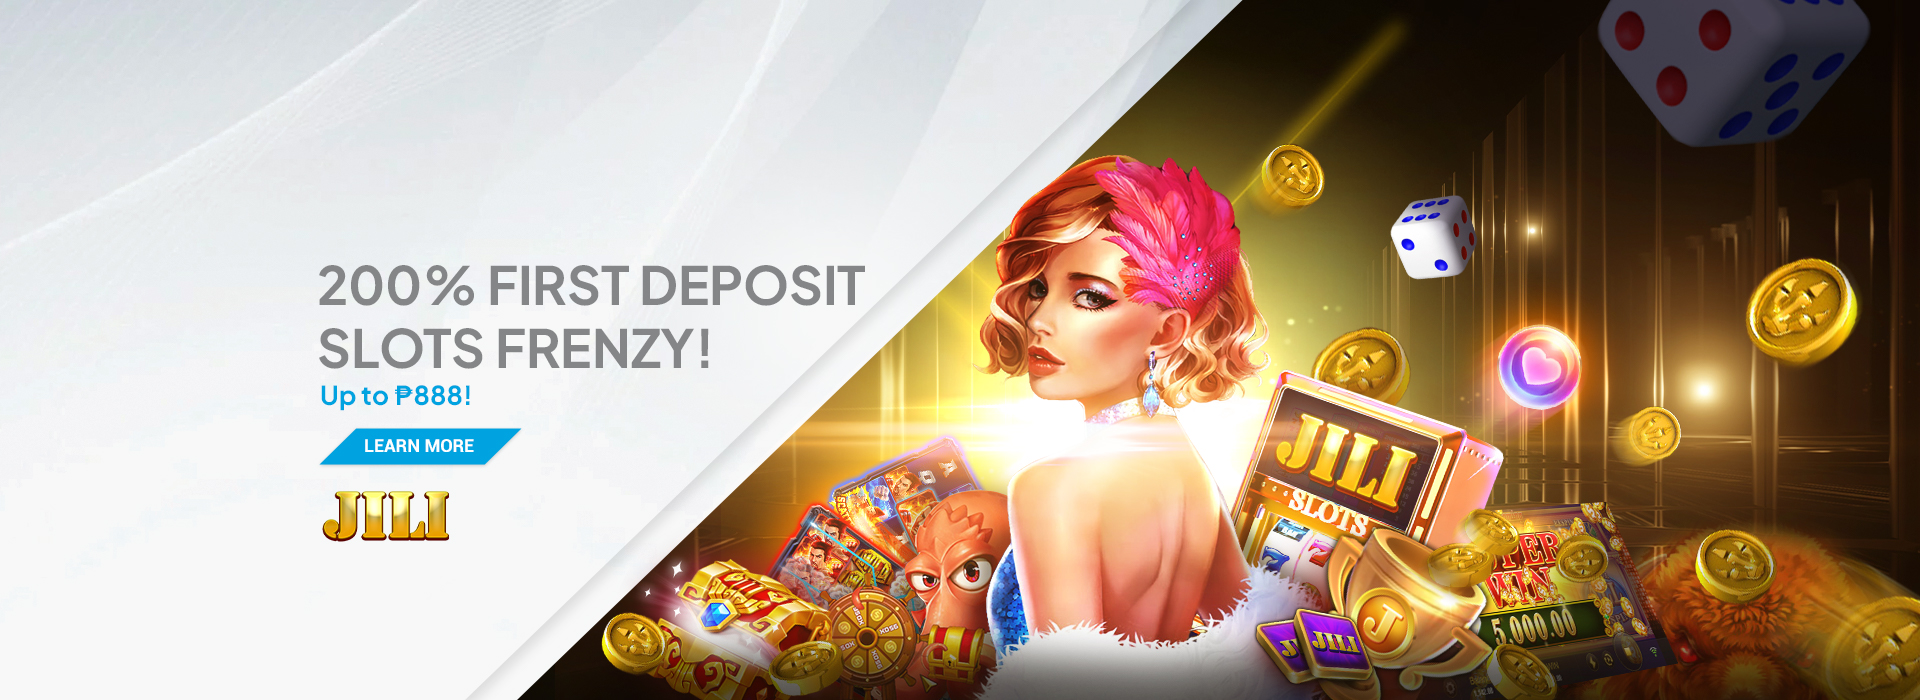 200% First Deposit Slots Frenzy! Up to ₱888!